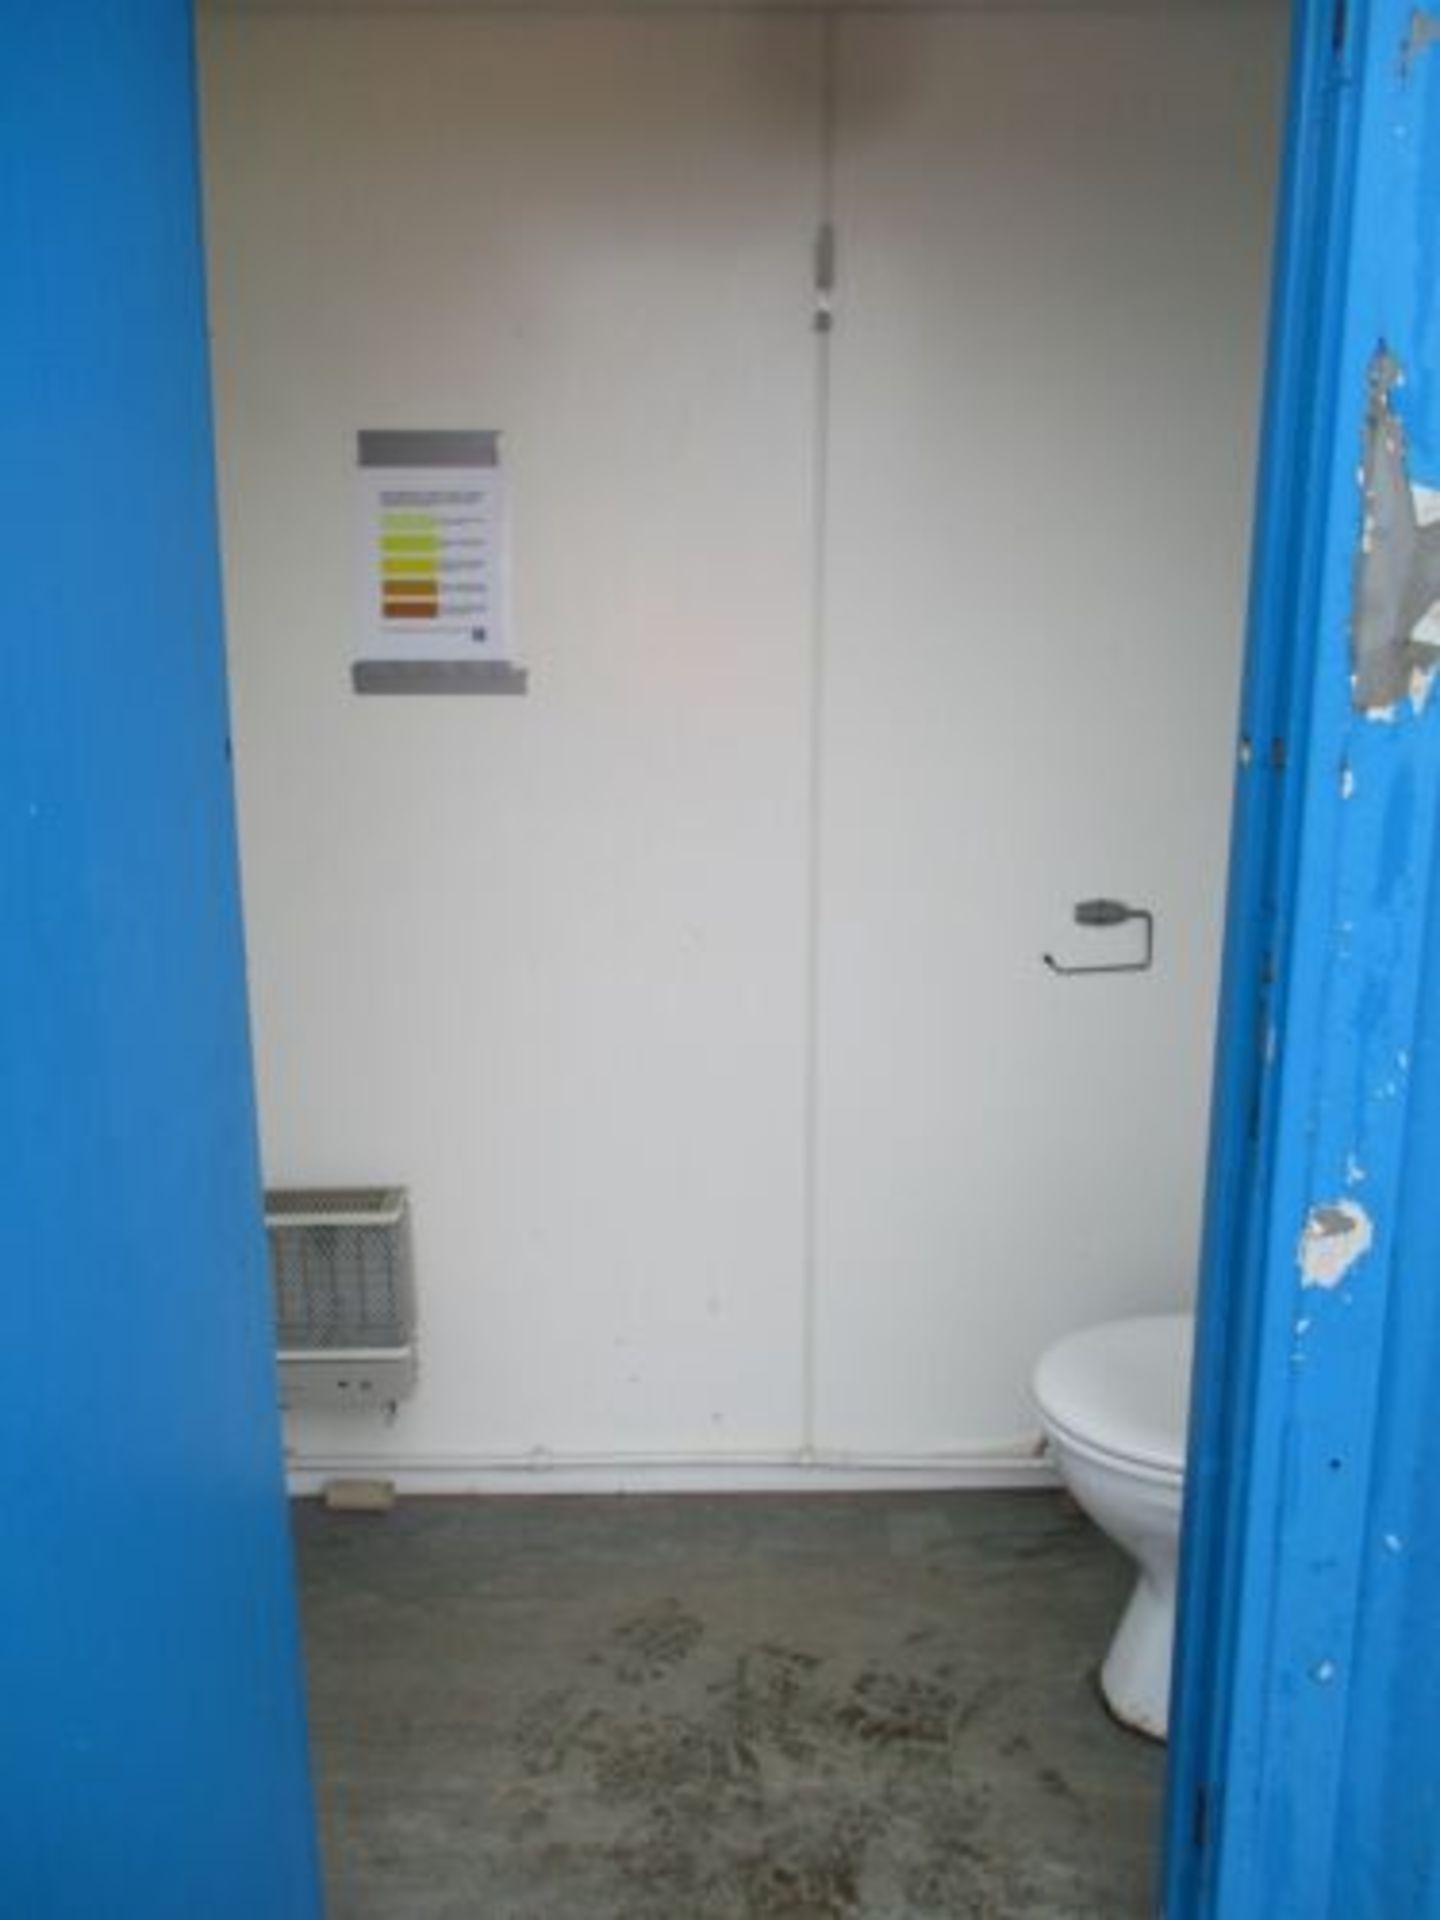 16 FT FEET FOOT SECURE SHIPPING CONTAINER TOILET BLOCK 3 + 1 DELIVERY ARRANGED - Image 8 of 8